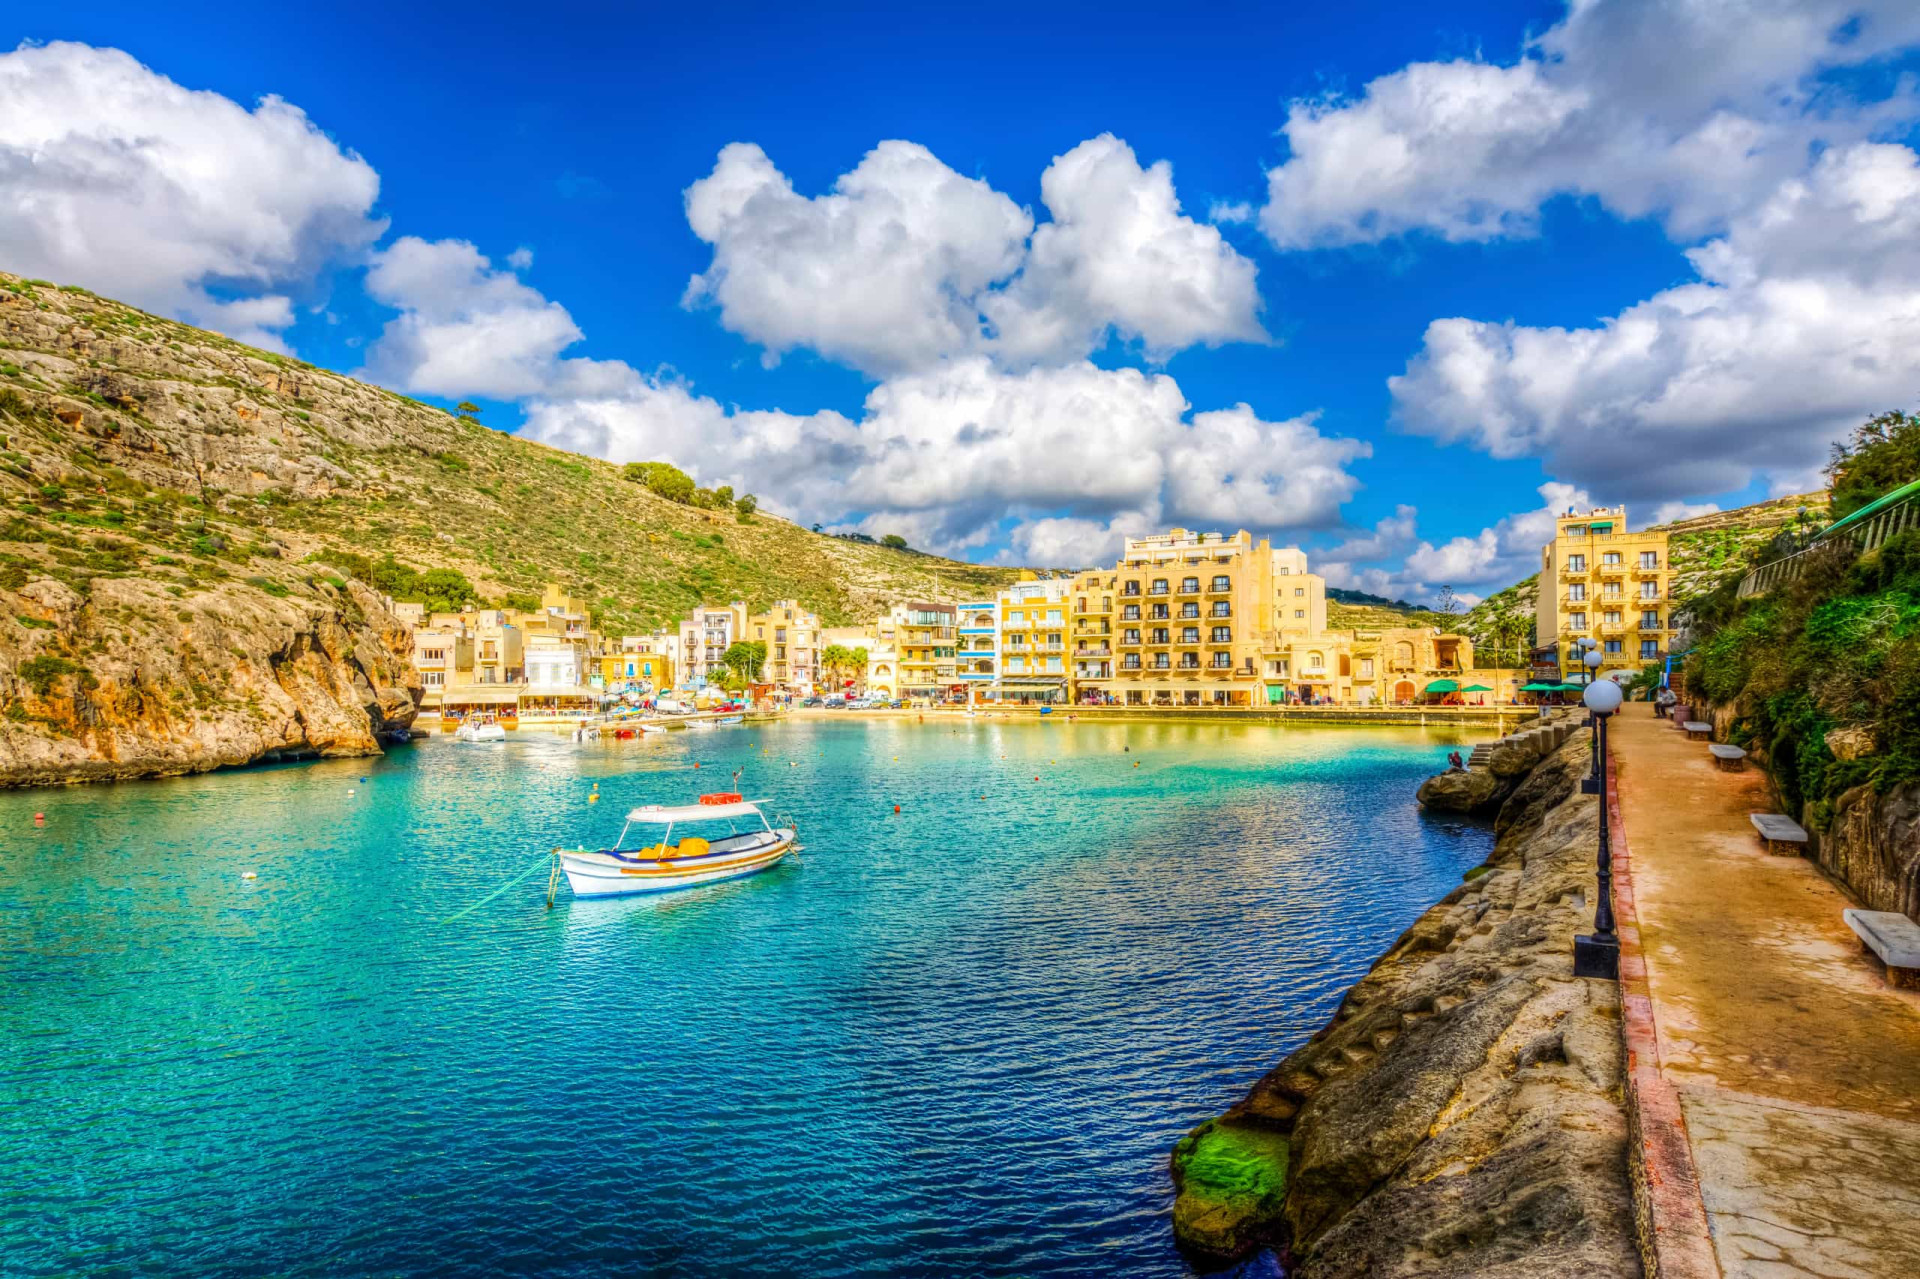 Gozo's seaside town of Xlendi is a popular tourist destination as well, with beautiful views and a secluded feel from the high cliffs.<p><a href="https://www.msn.com/en-us/community/channel/vid-7xx8mnucu55yw63we9va2gwr7uihbxwc68fxqp25x6tg4ftibpra?cvid=94631541bc0f4f89bfd59158d696ad7e">Follow us and access great exclusive content every day</a></p>